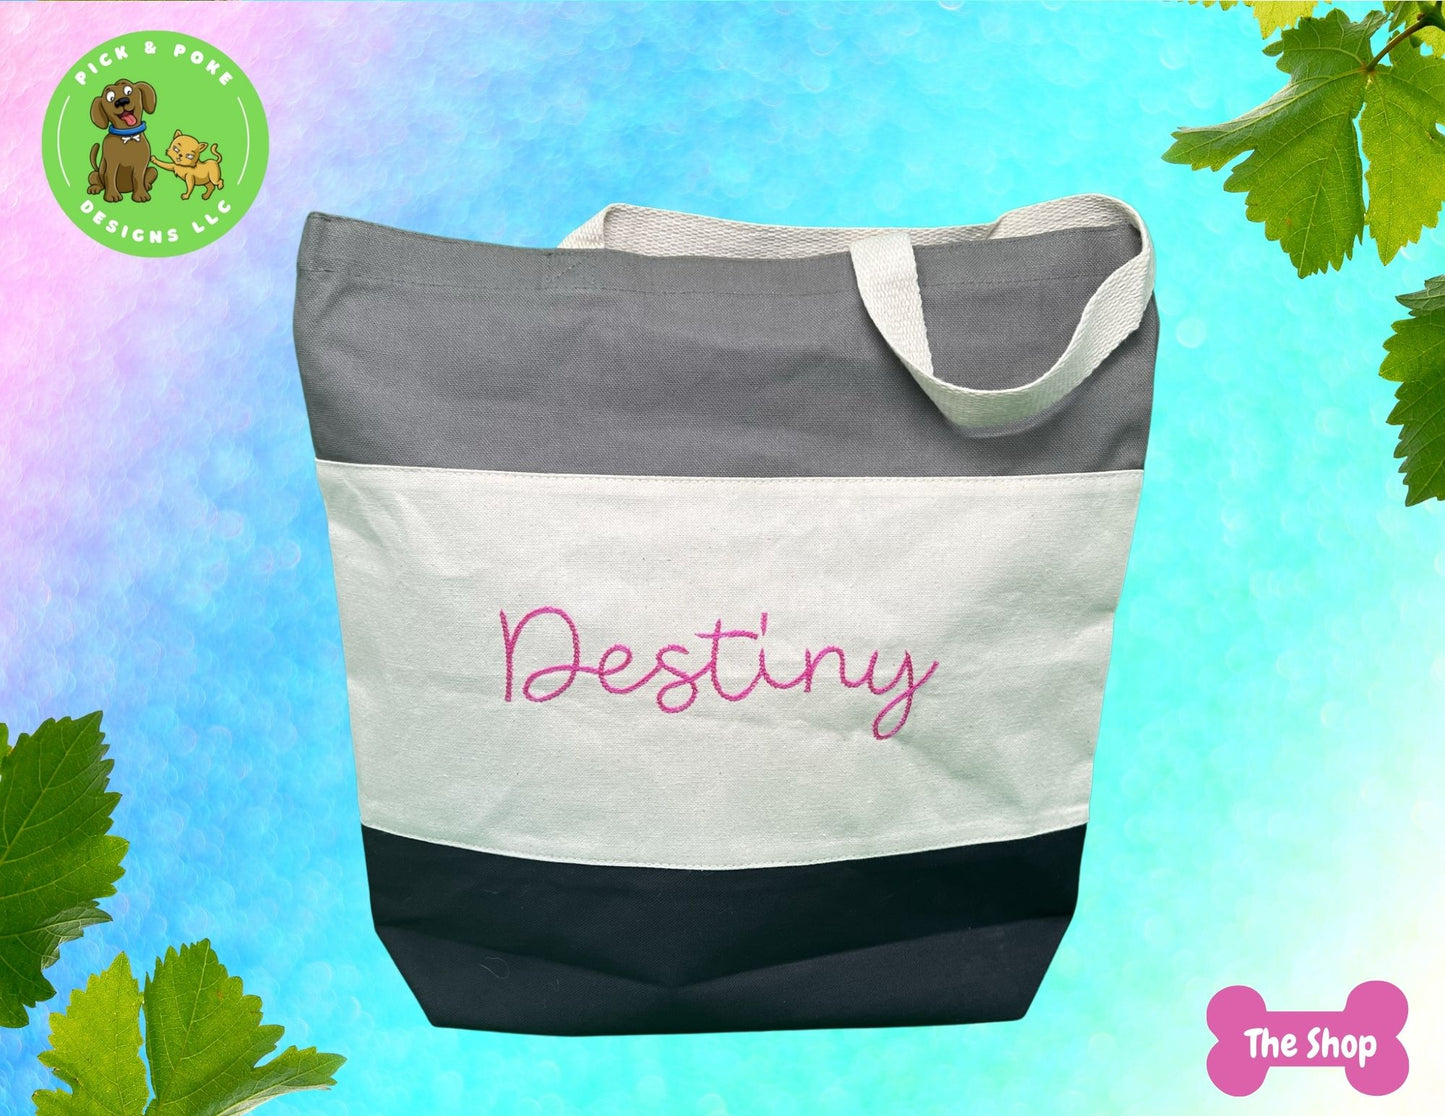 Custom Embroidered Tote Bag Personalized Name / Great as a Grocery Bag, Teacher Gift, Bridesmaids Gift, or Christmas Gift / Tri-Color Canvas Tote